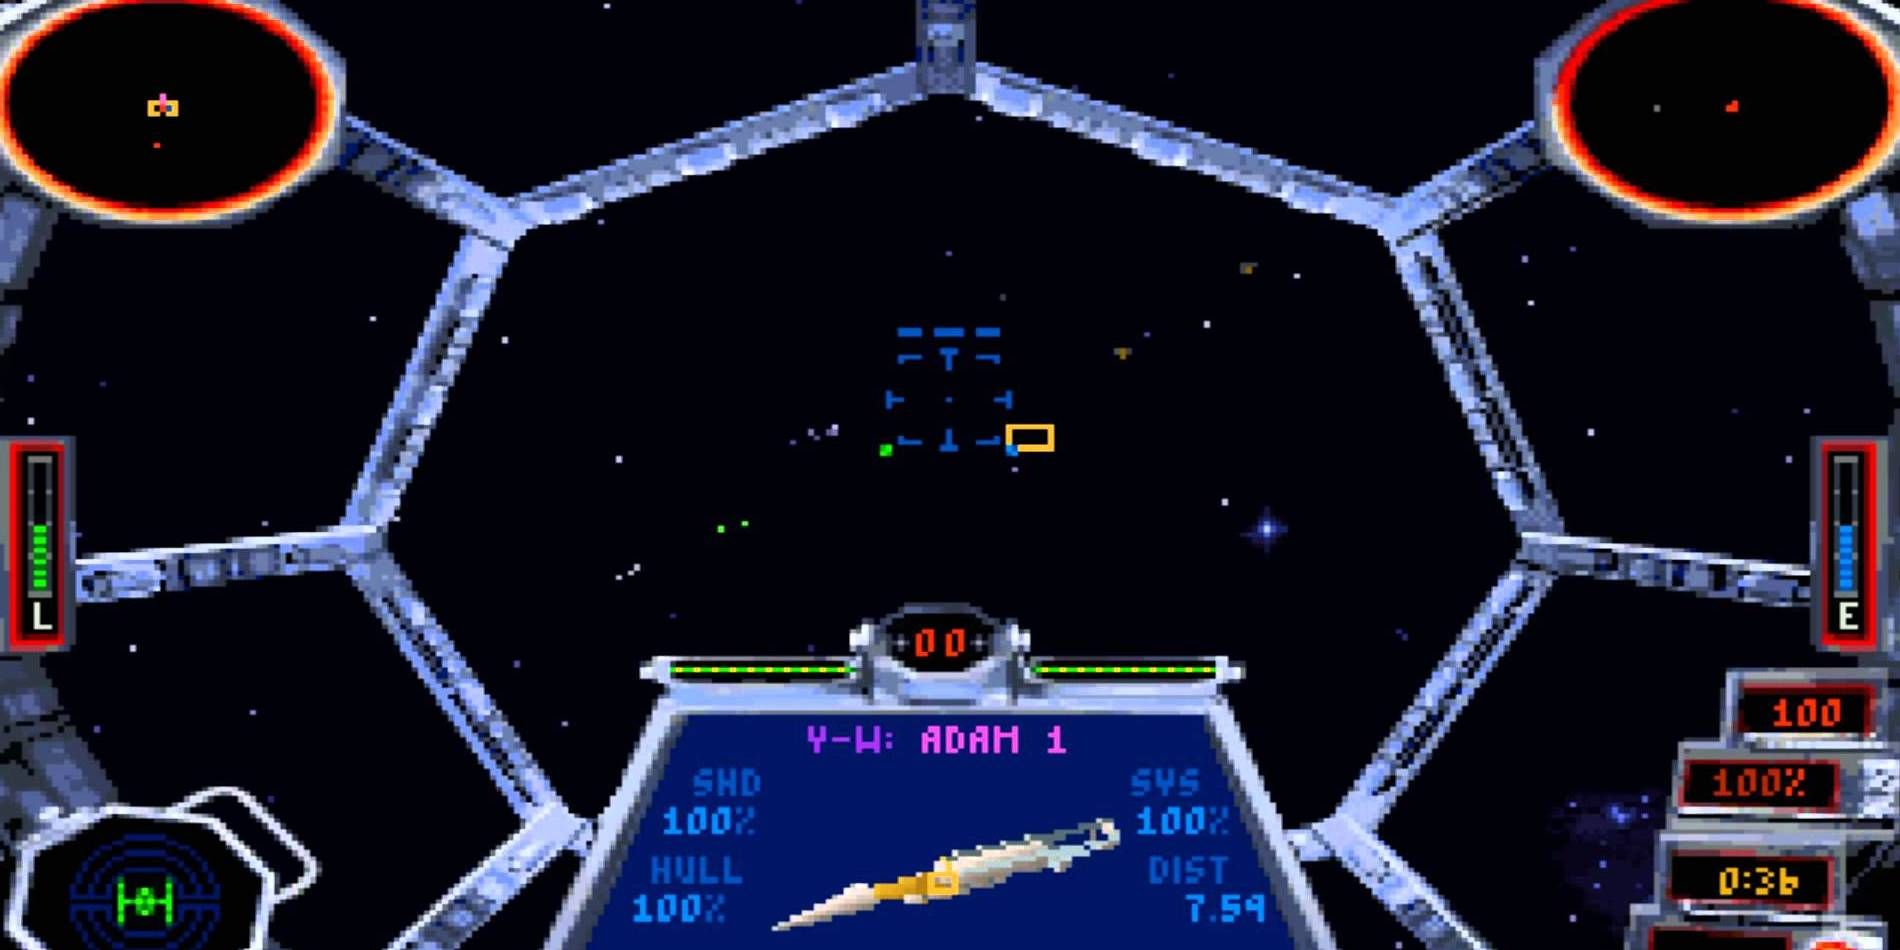 Cockpit view from Star Wars: TIE Fighter as a TIE flies through an expanse of space.